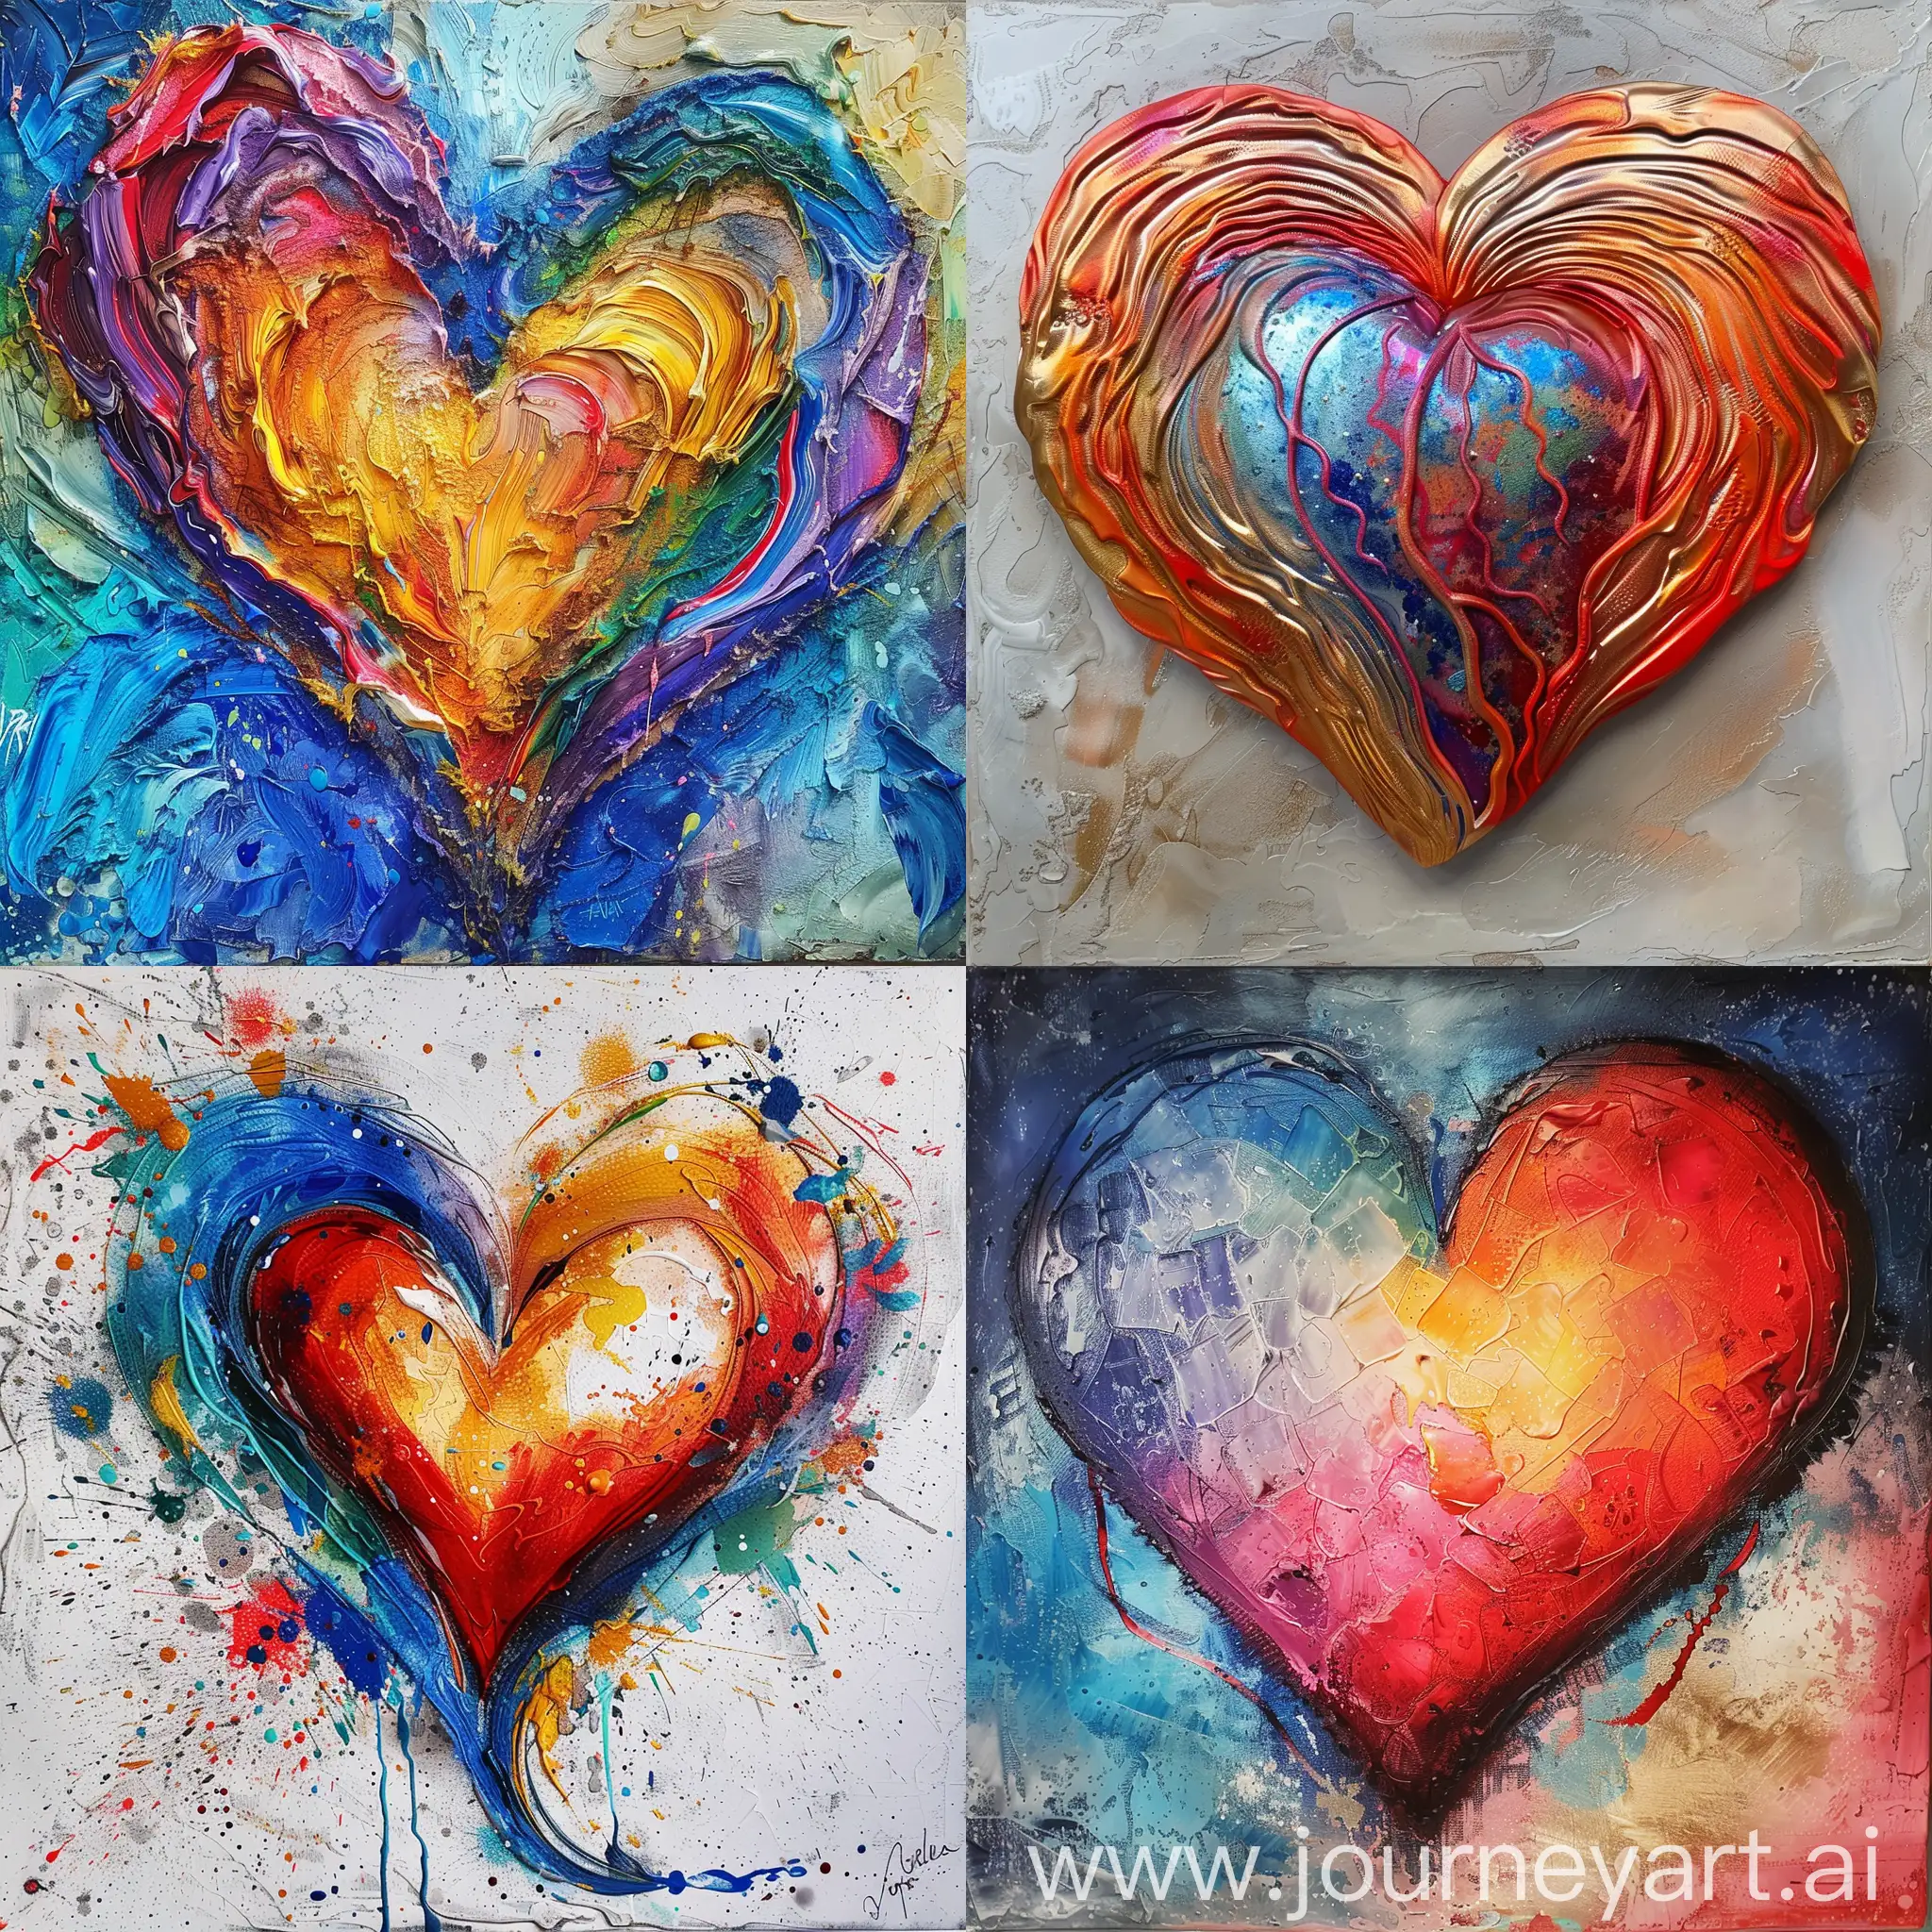 Heart-Shaped-Masterpiece-Artwork-with-Vibrant-Colors